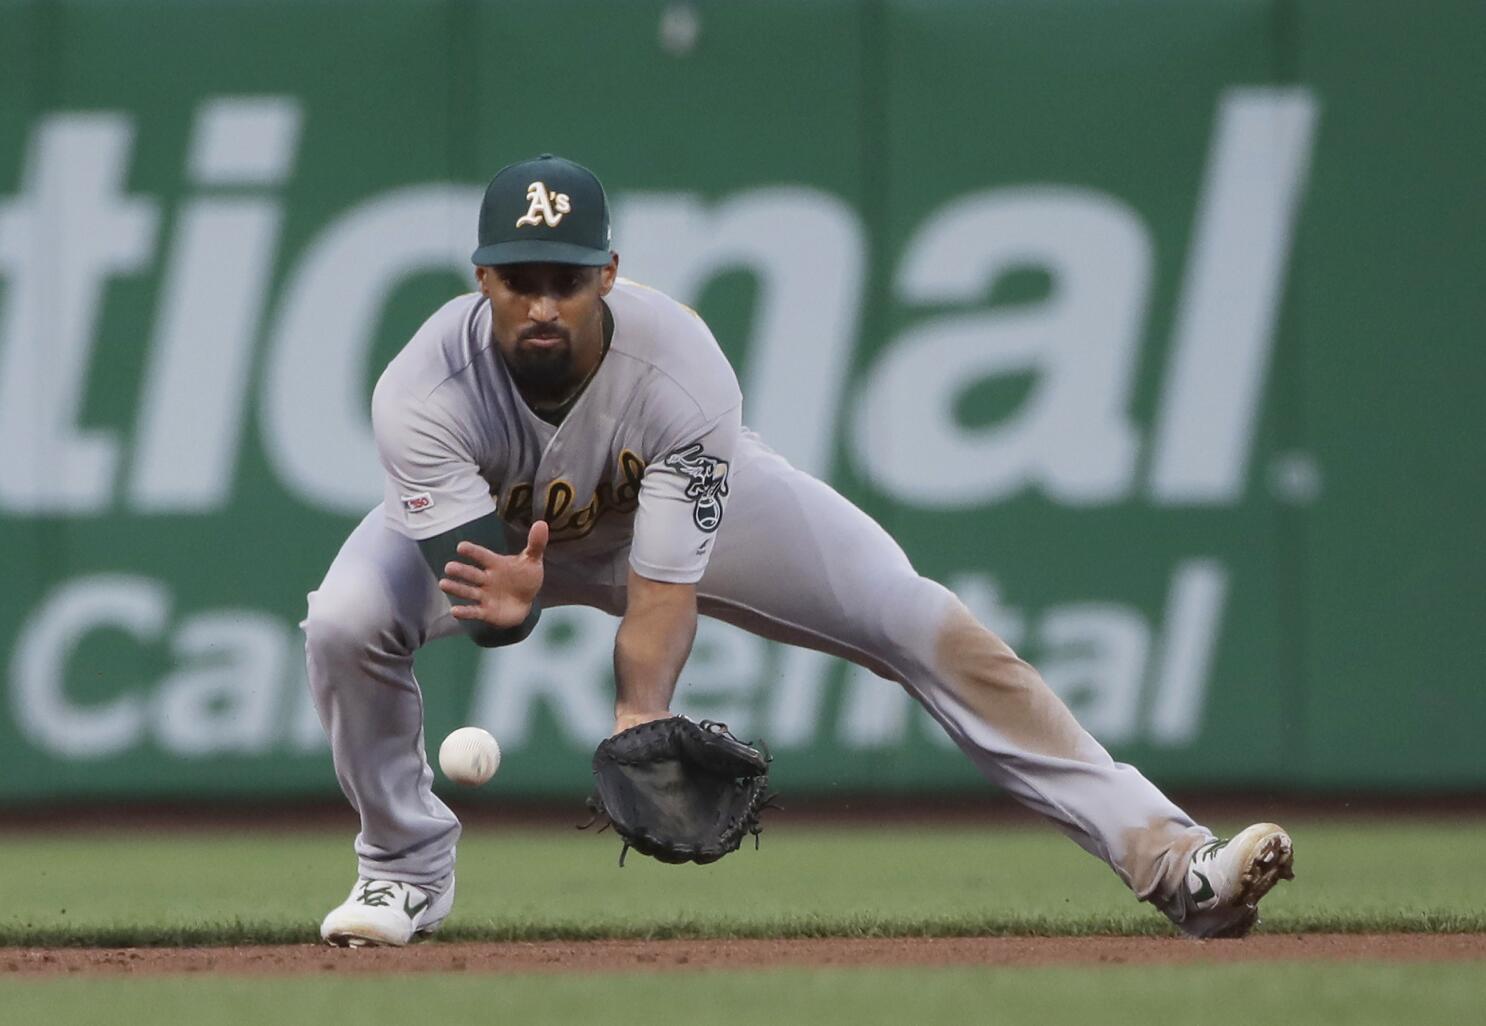 Marcus Semien, Now More of a Shortstop